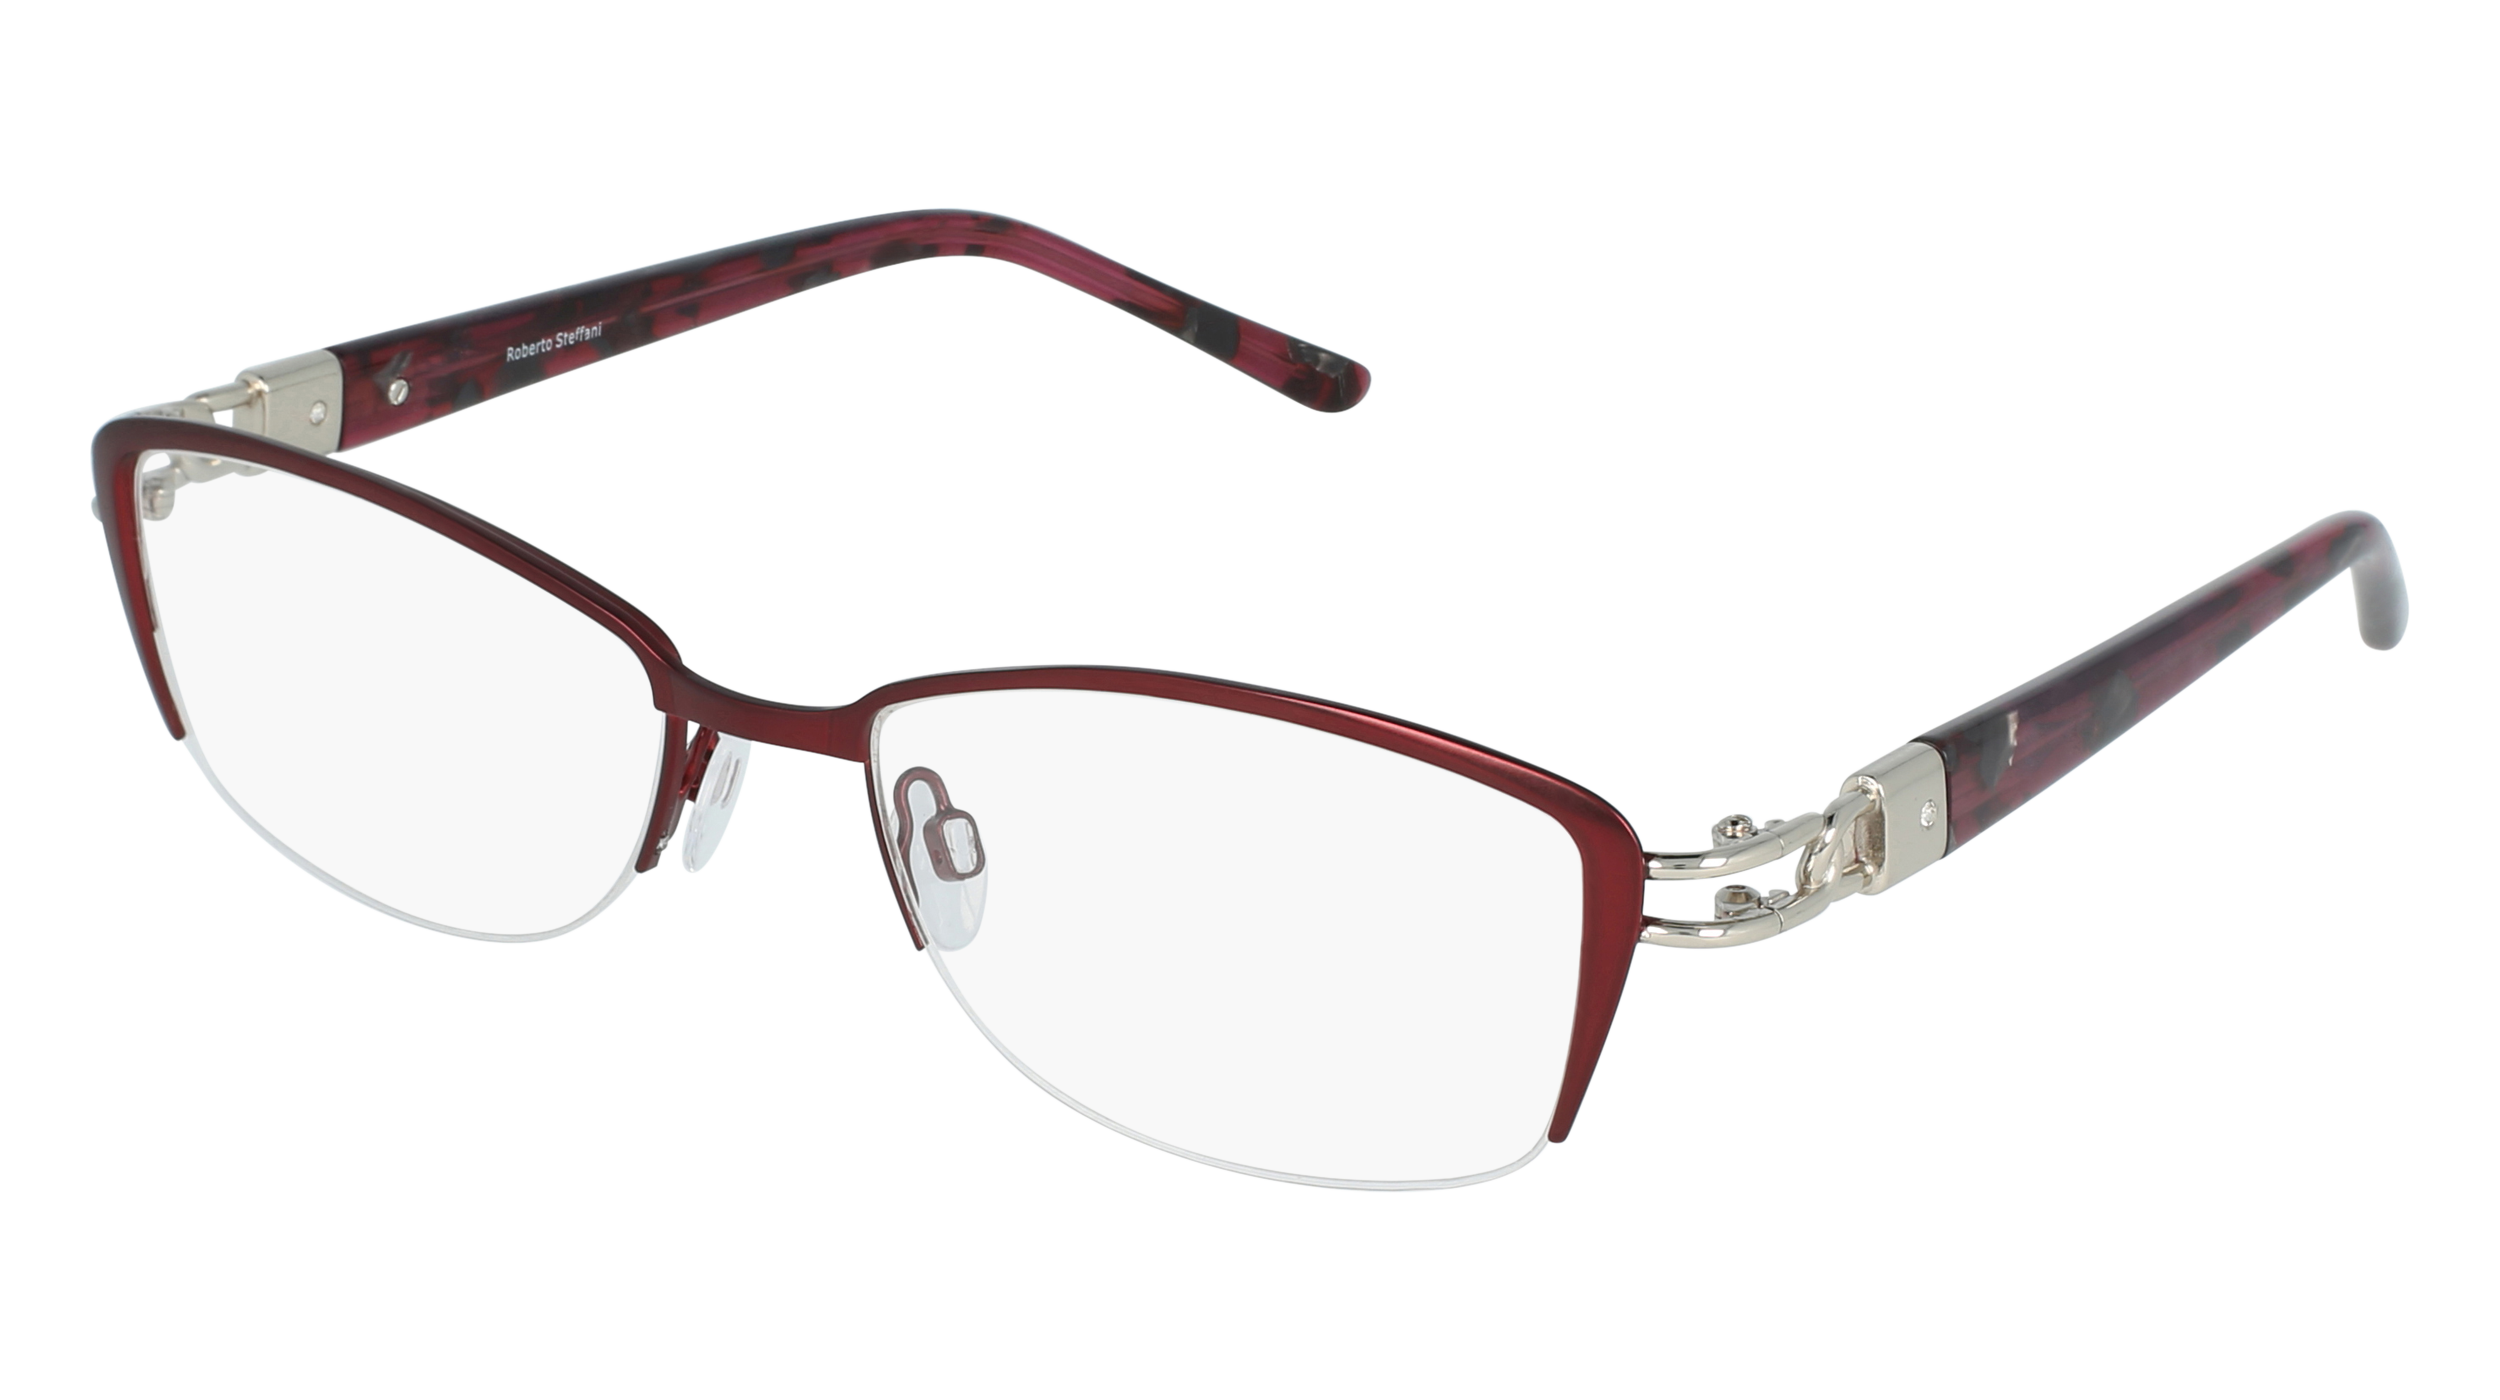 R RS 159 women's eyeglasses (from the side)